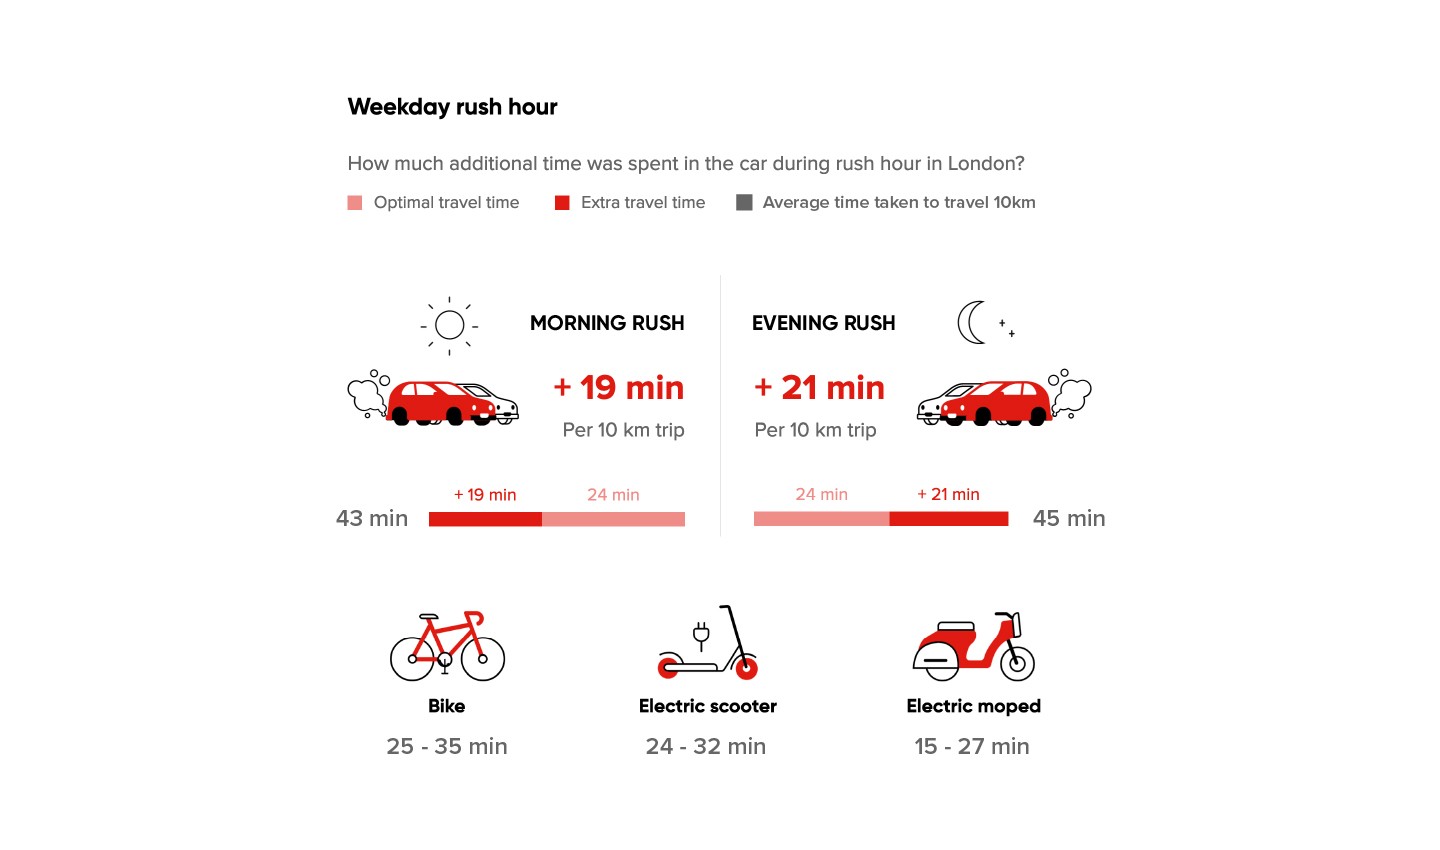 A diagram comparing the time drivers spend in traffic thanks to rush hour using different modes of transport.